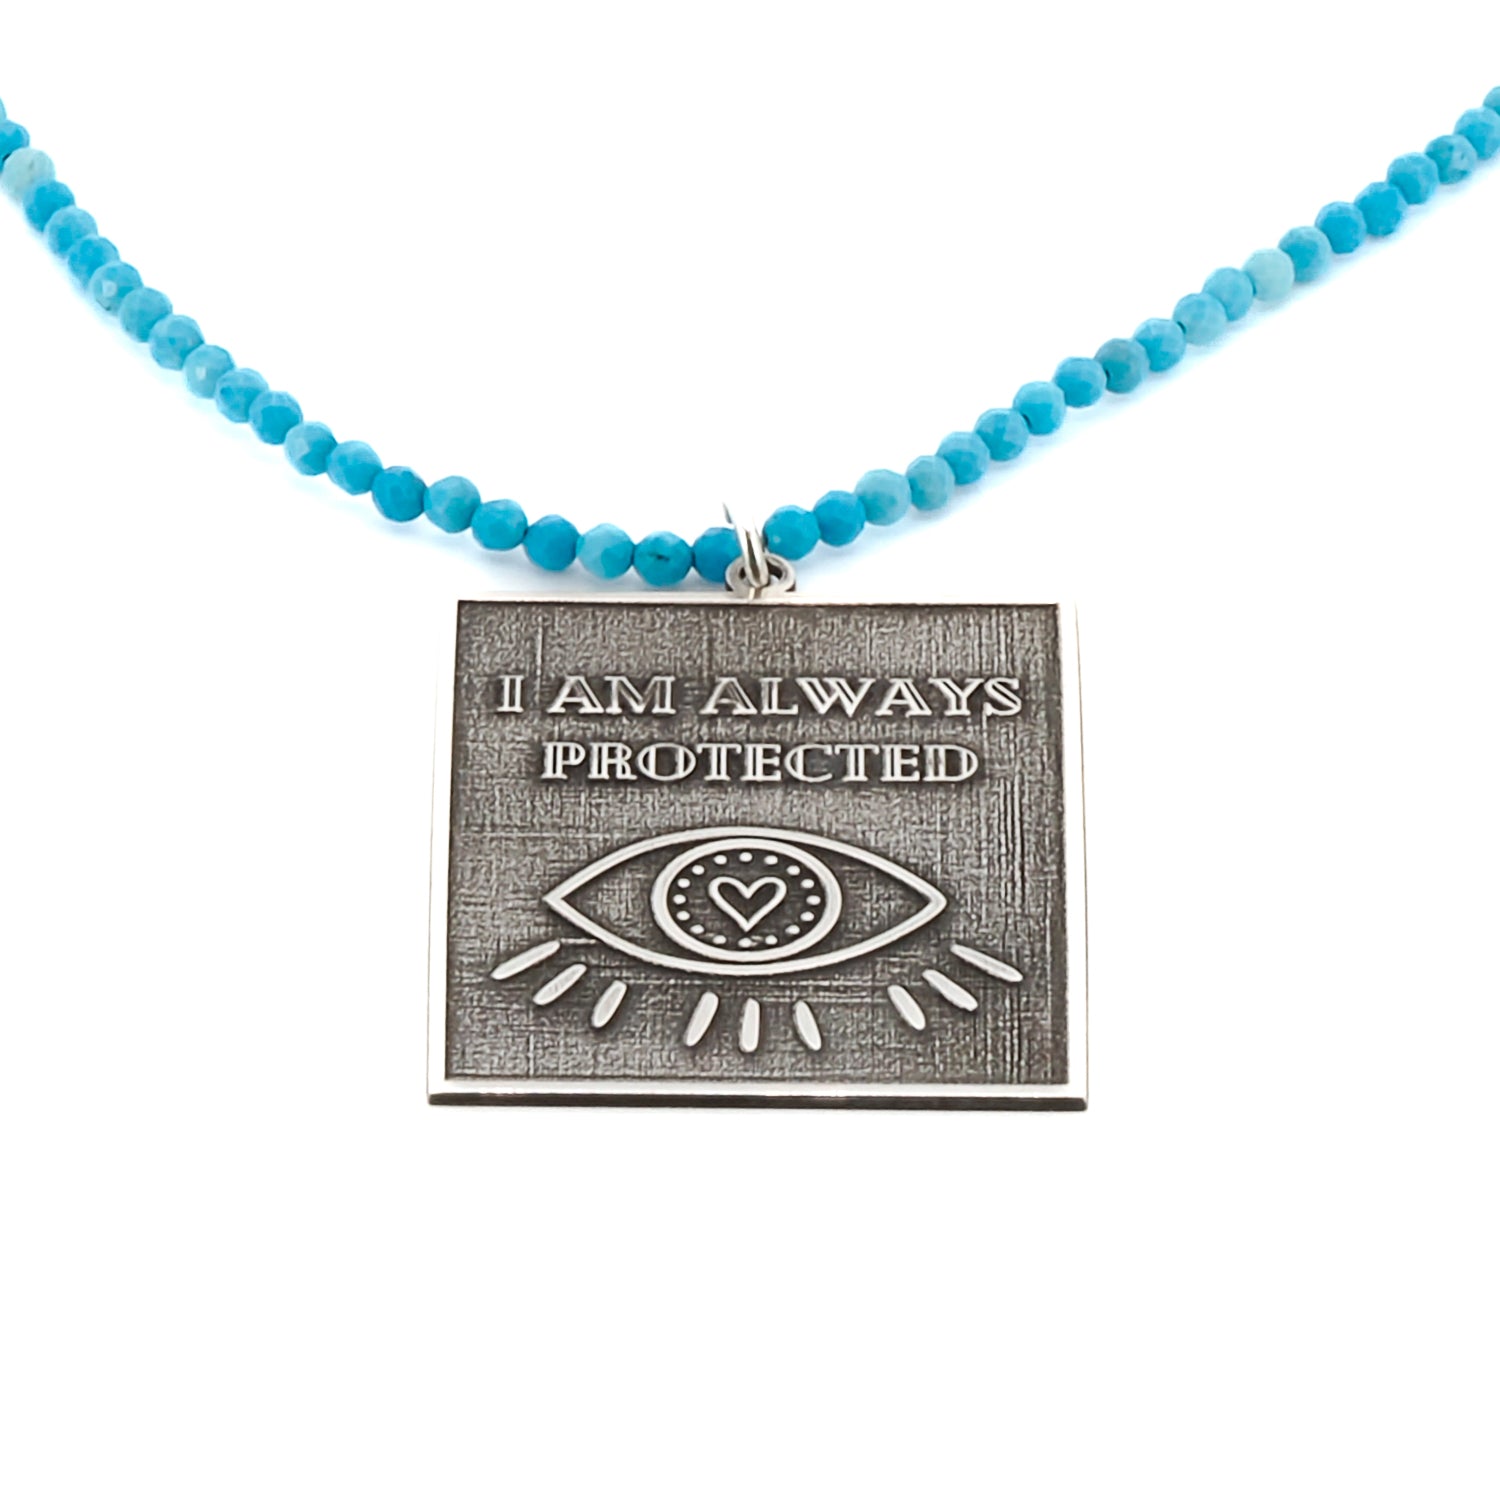 The Turquoise Necklace, highlighting its unique design and craftsmanship